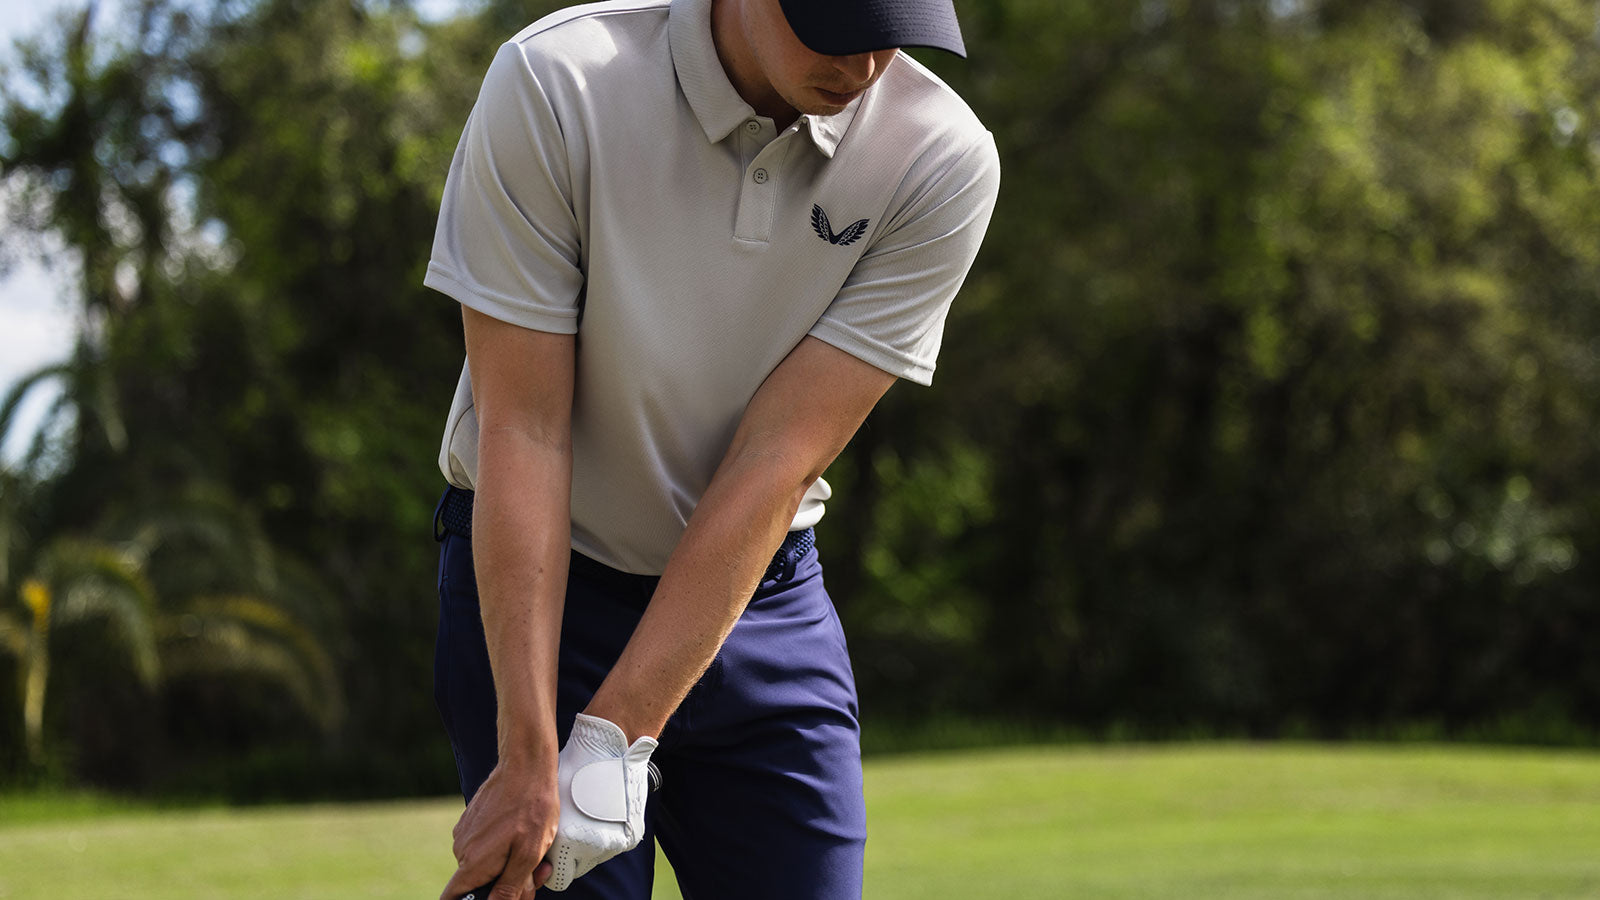 What to wear in golf to master the course